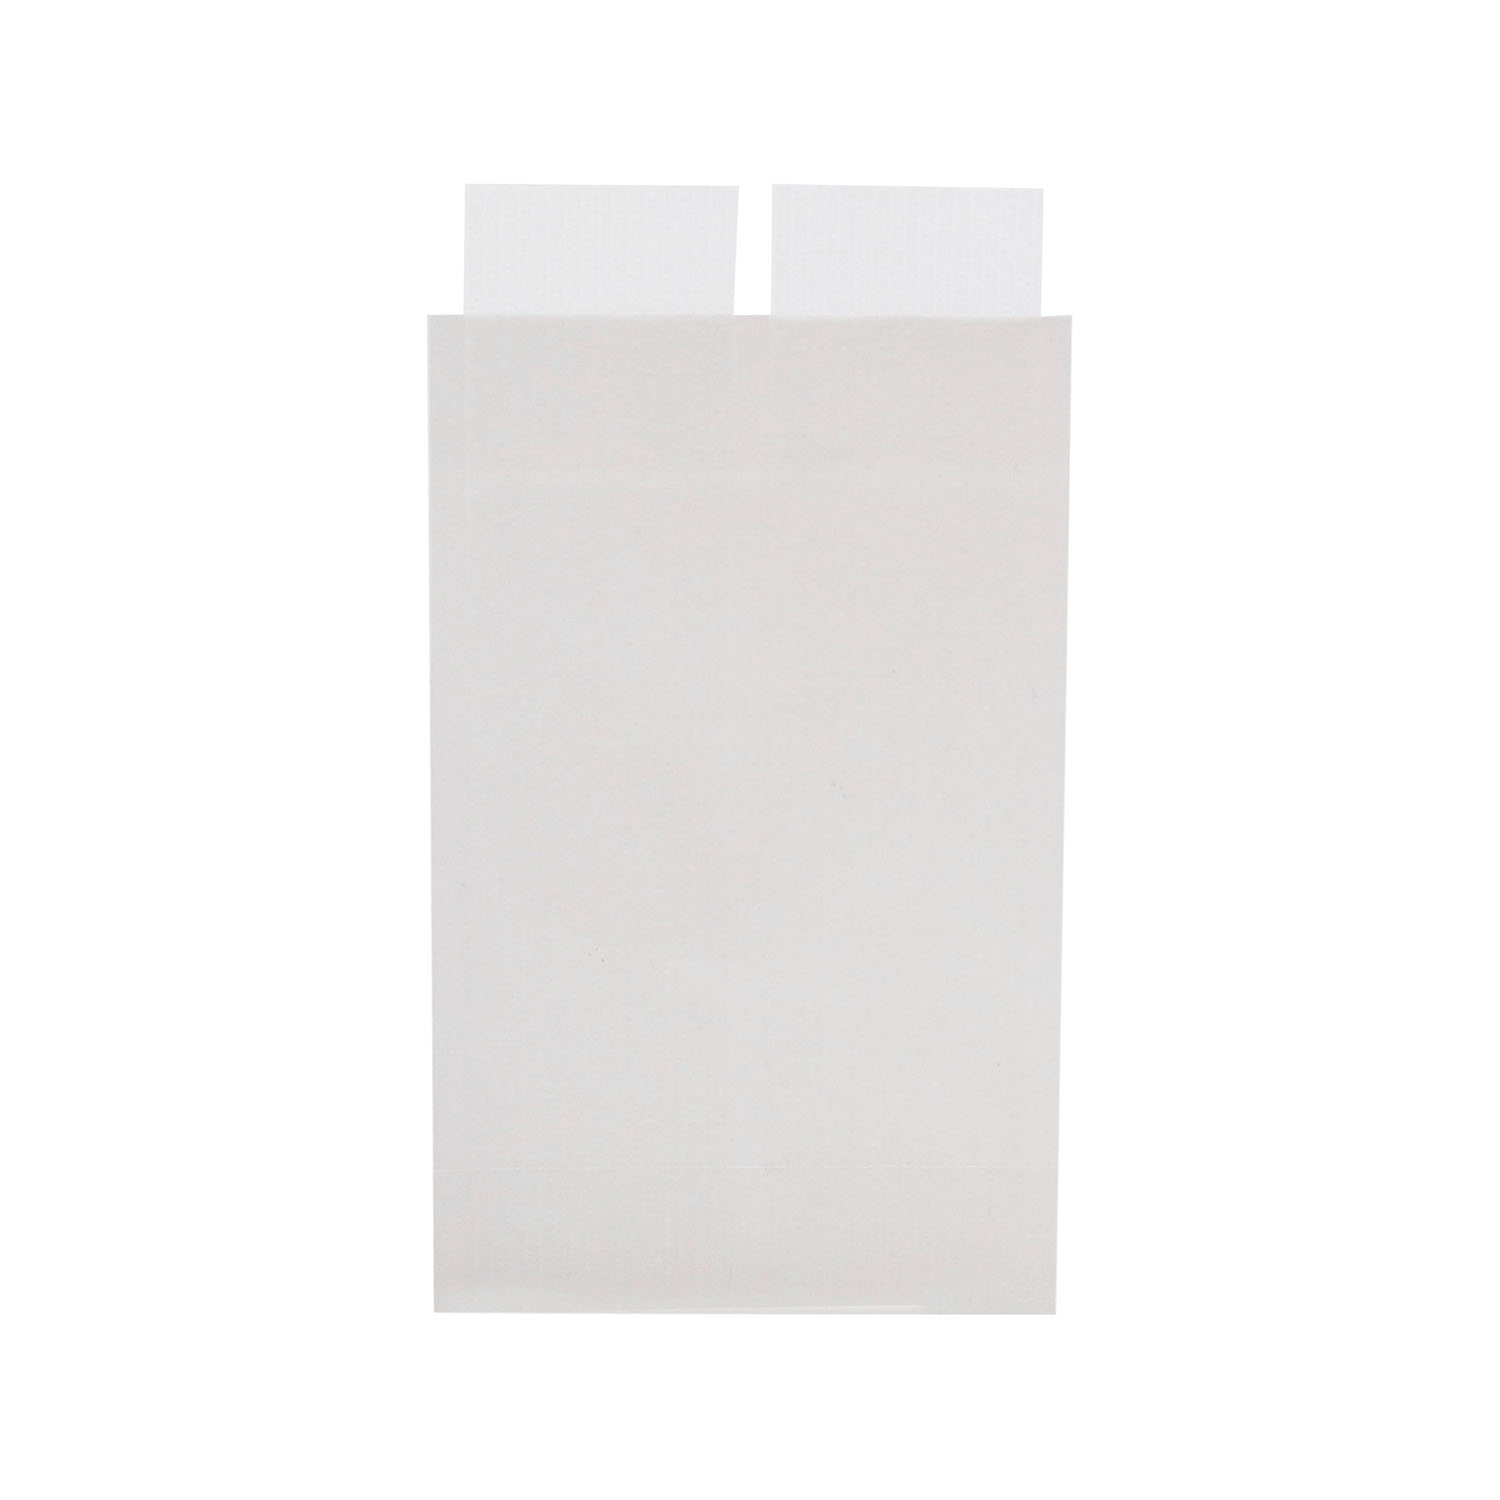 DUKAL WOUND CLOSURE STRIPS : 5158 CS                $187.33 Stocked